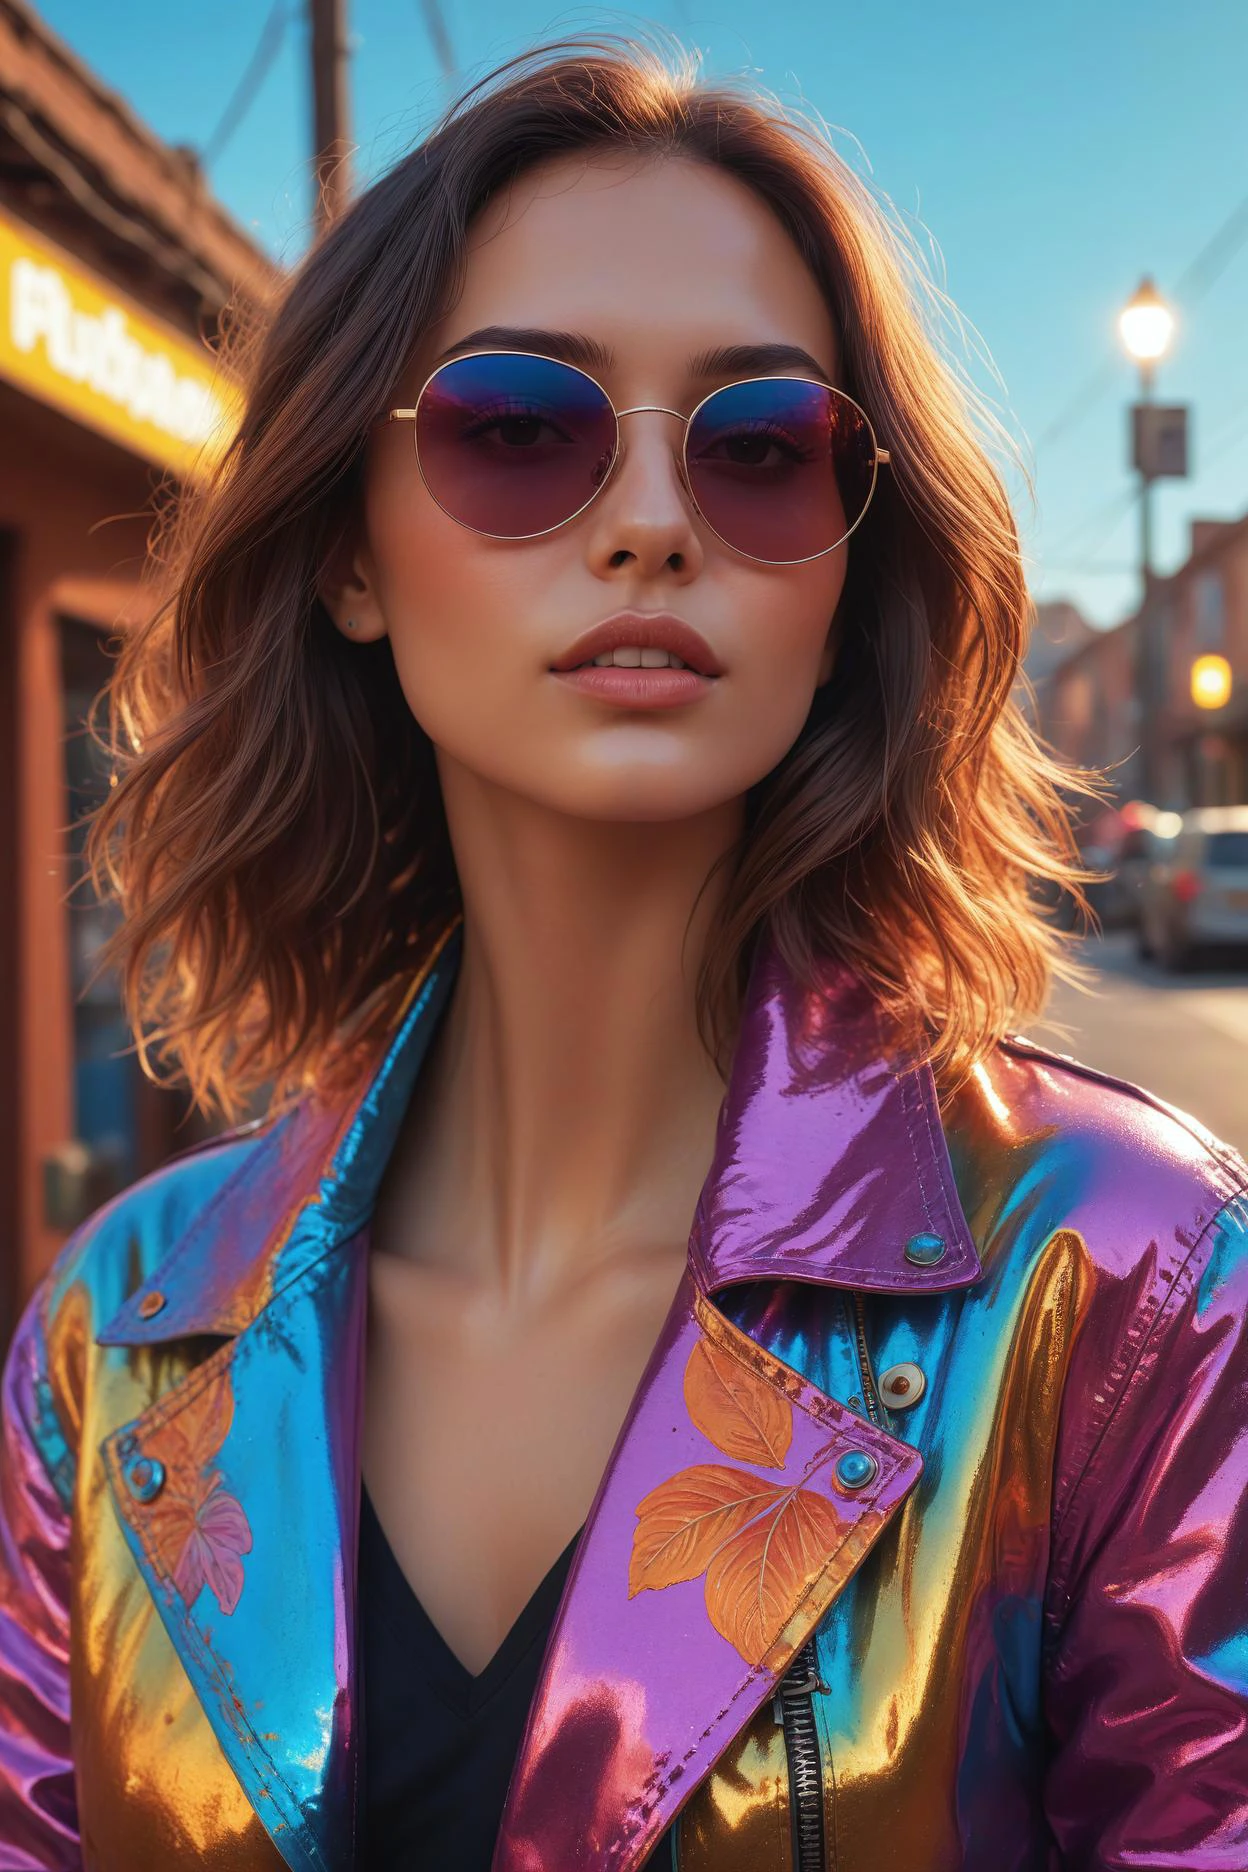 bohemian aesthetic bright, (friarmoody lighting,perfect features,sharp,4k,moist skin,soft cinematic light,soothing tones,soft image,), a woman wearing a shiny jacket and sunglasses posing for a picture, style in digital painting, style digital painting, in style of digital illustration, cinema 4d colorful render, in style of digital painting, vibrant digital painting, colorful digital painting, glossy digital painting, smooth digital art, 3d digital art 4k, full color digital art, smooth. digital painting . free spirited, eclectic, colorful, highly detailed